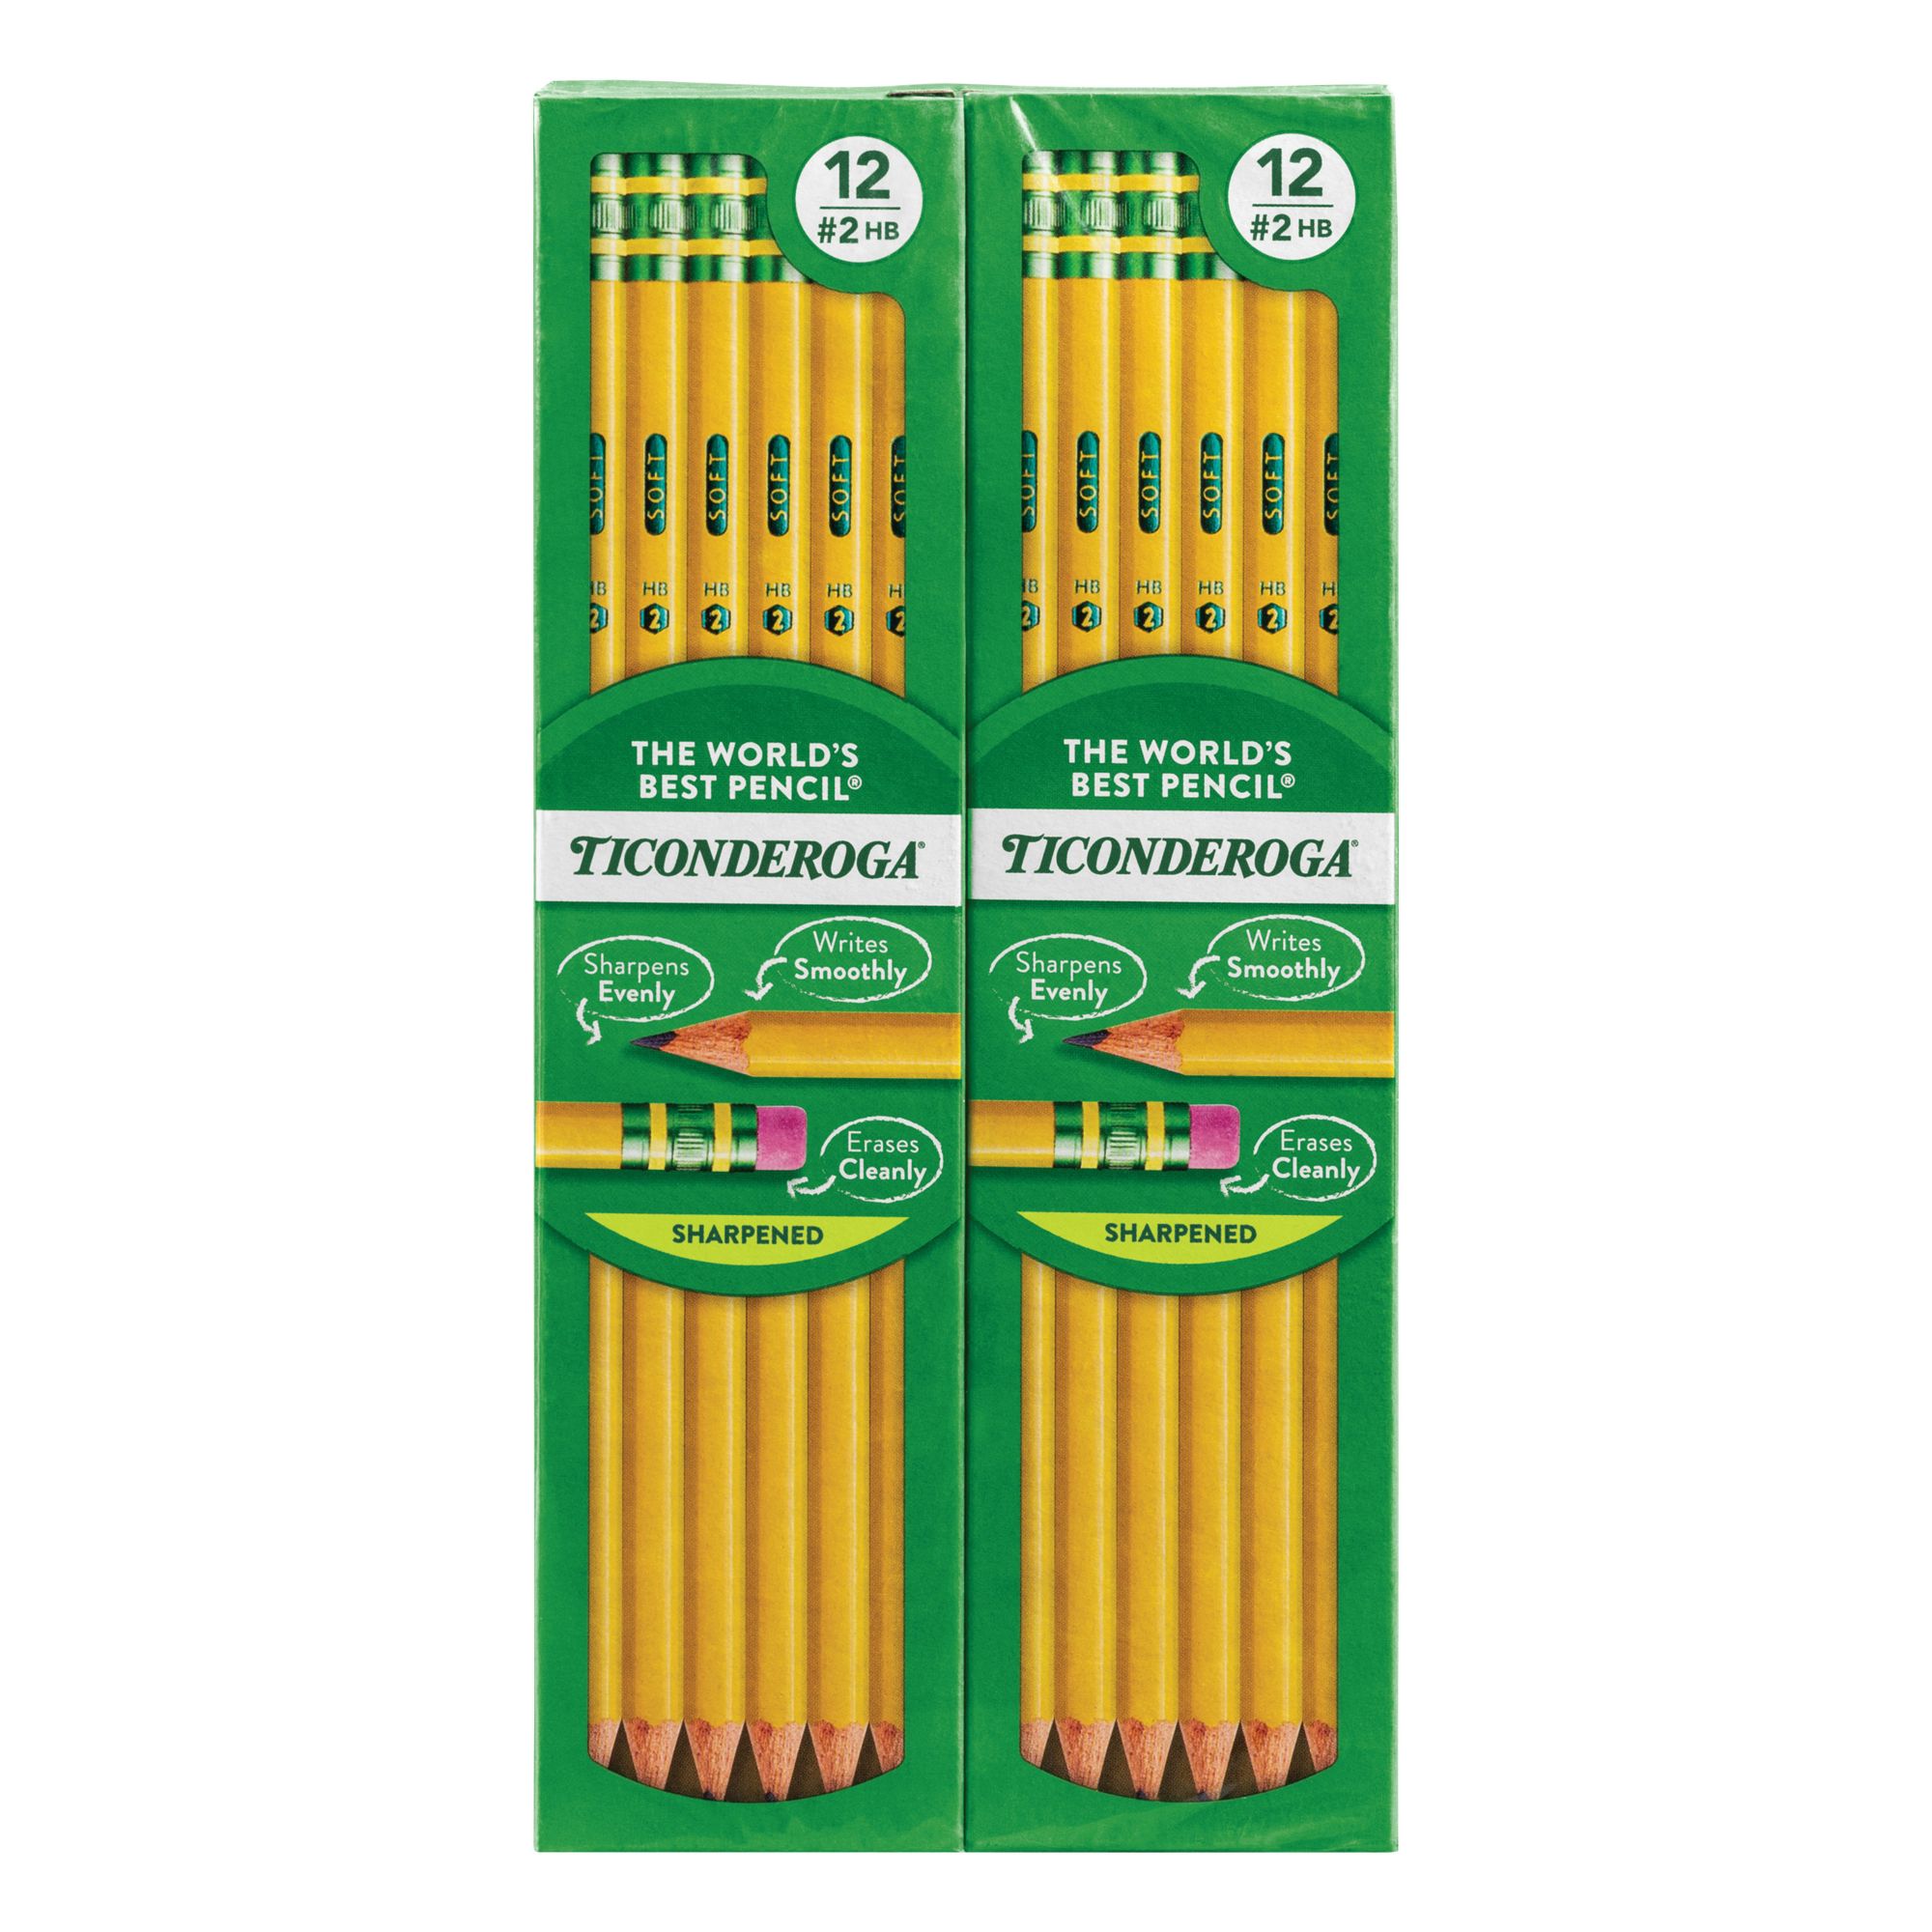 Ticonderoga Wood-Cased Pencils, Pre-Sharpened, 2 HB Soft, Yellow, 10 Count